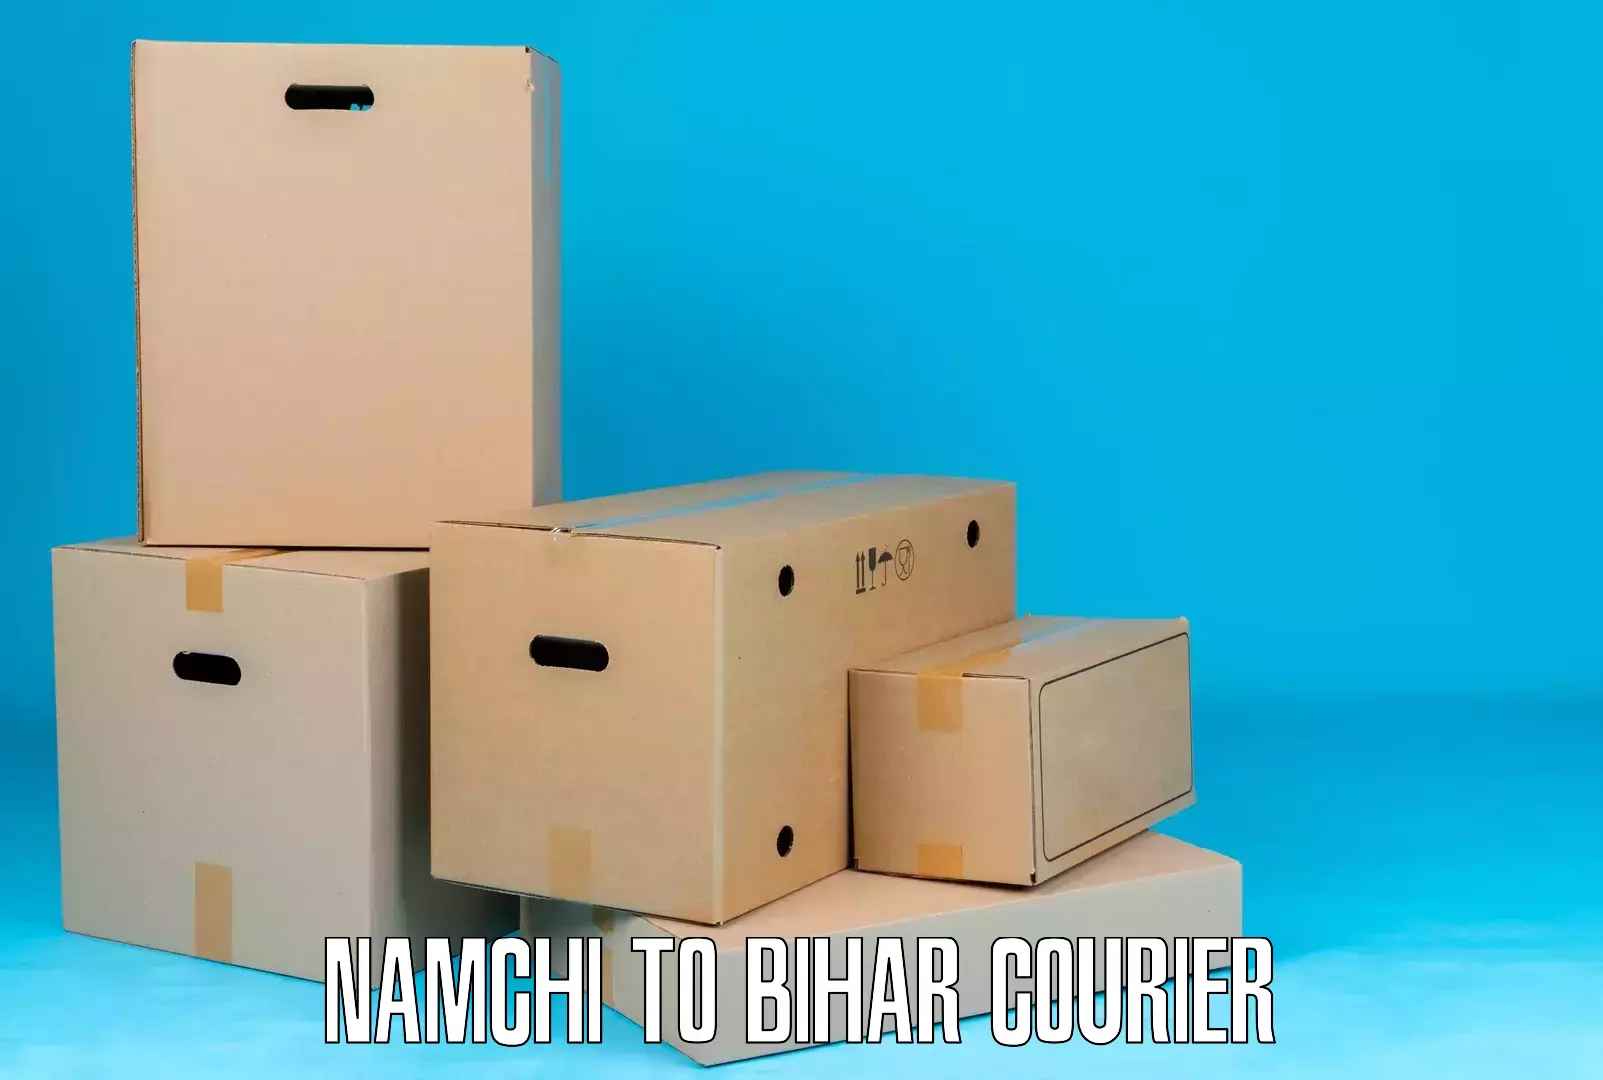 Package delivery network Namchi to Bihta